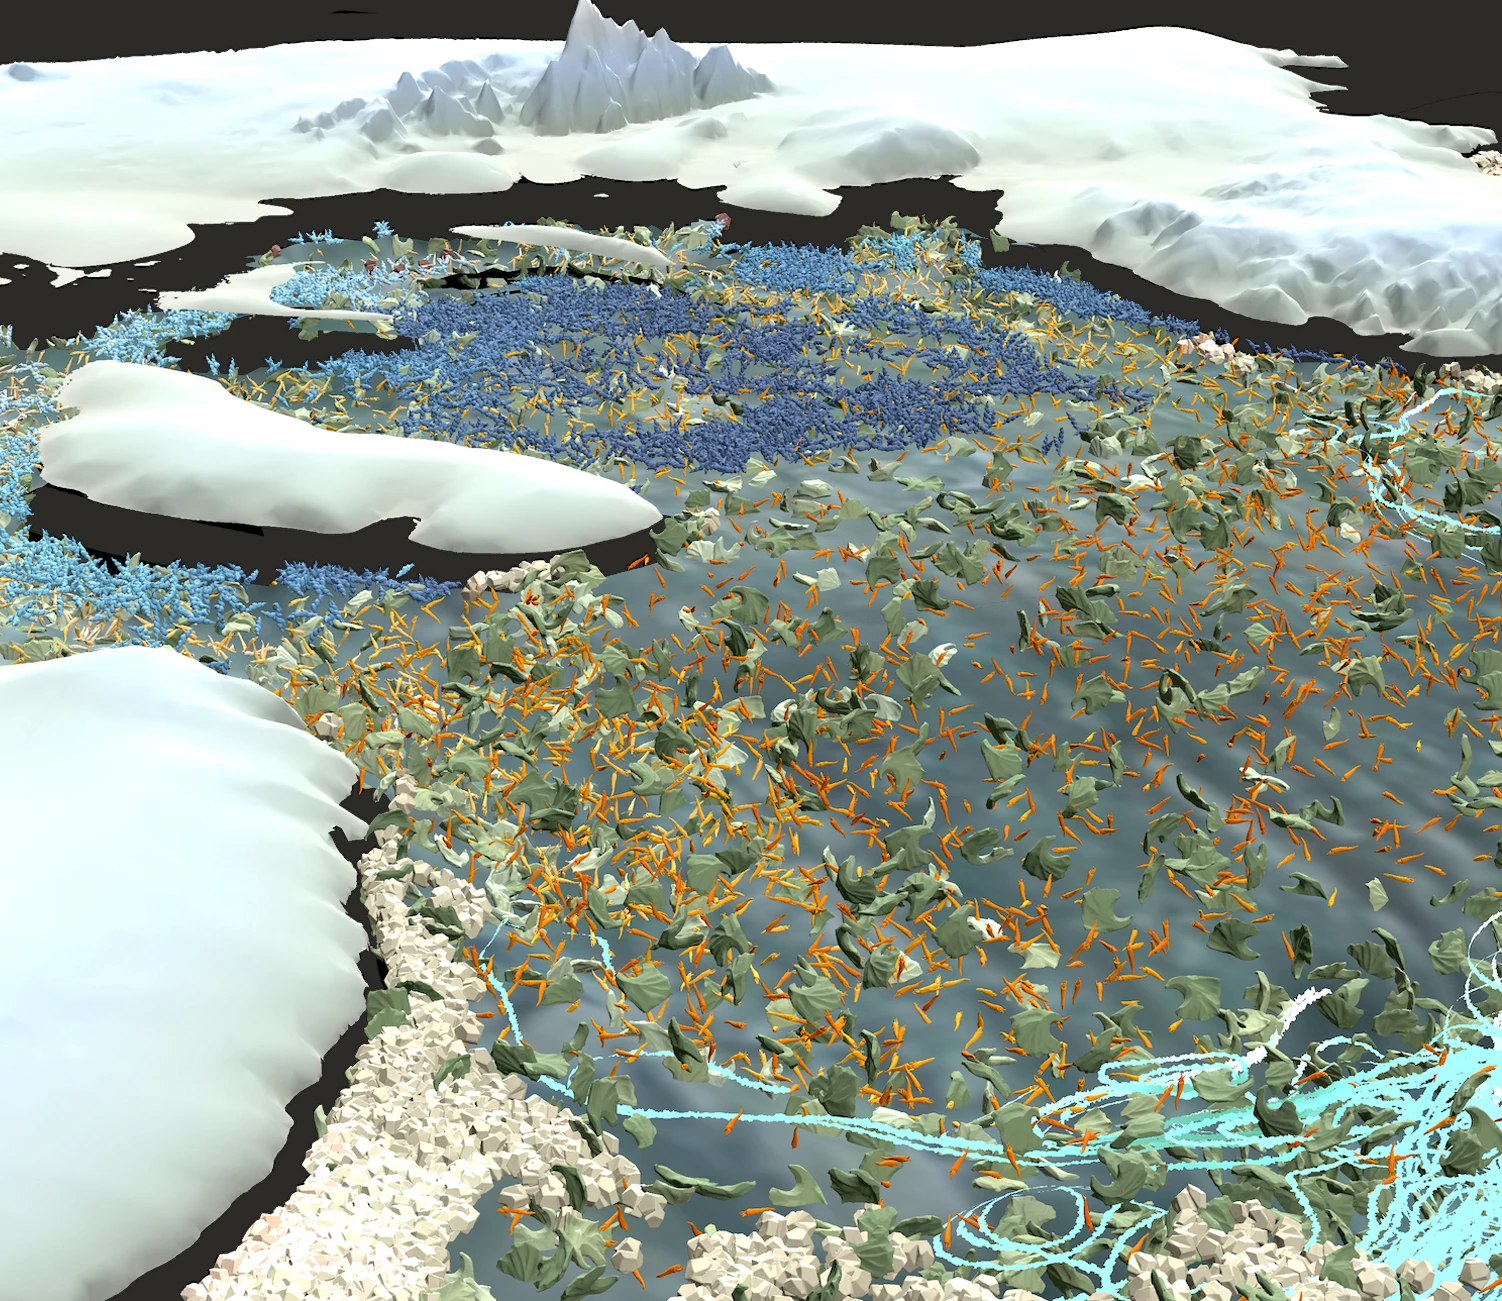 Visualization of waters under the Antarctic Filchner Ronne Ice Shelf containing glyphs associated with flora, fauna and mineral associations.